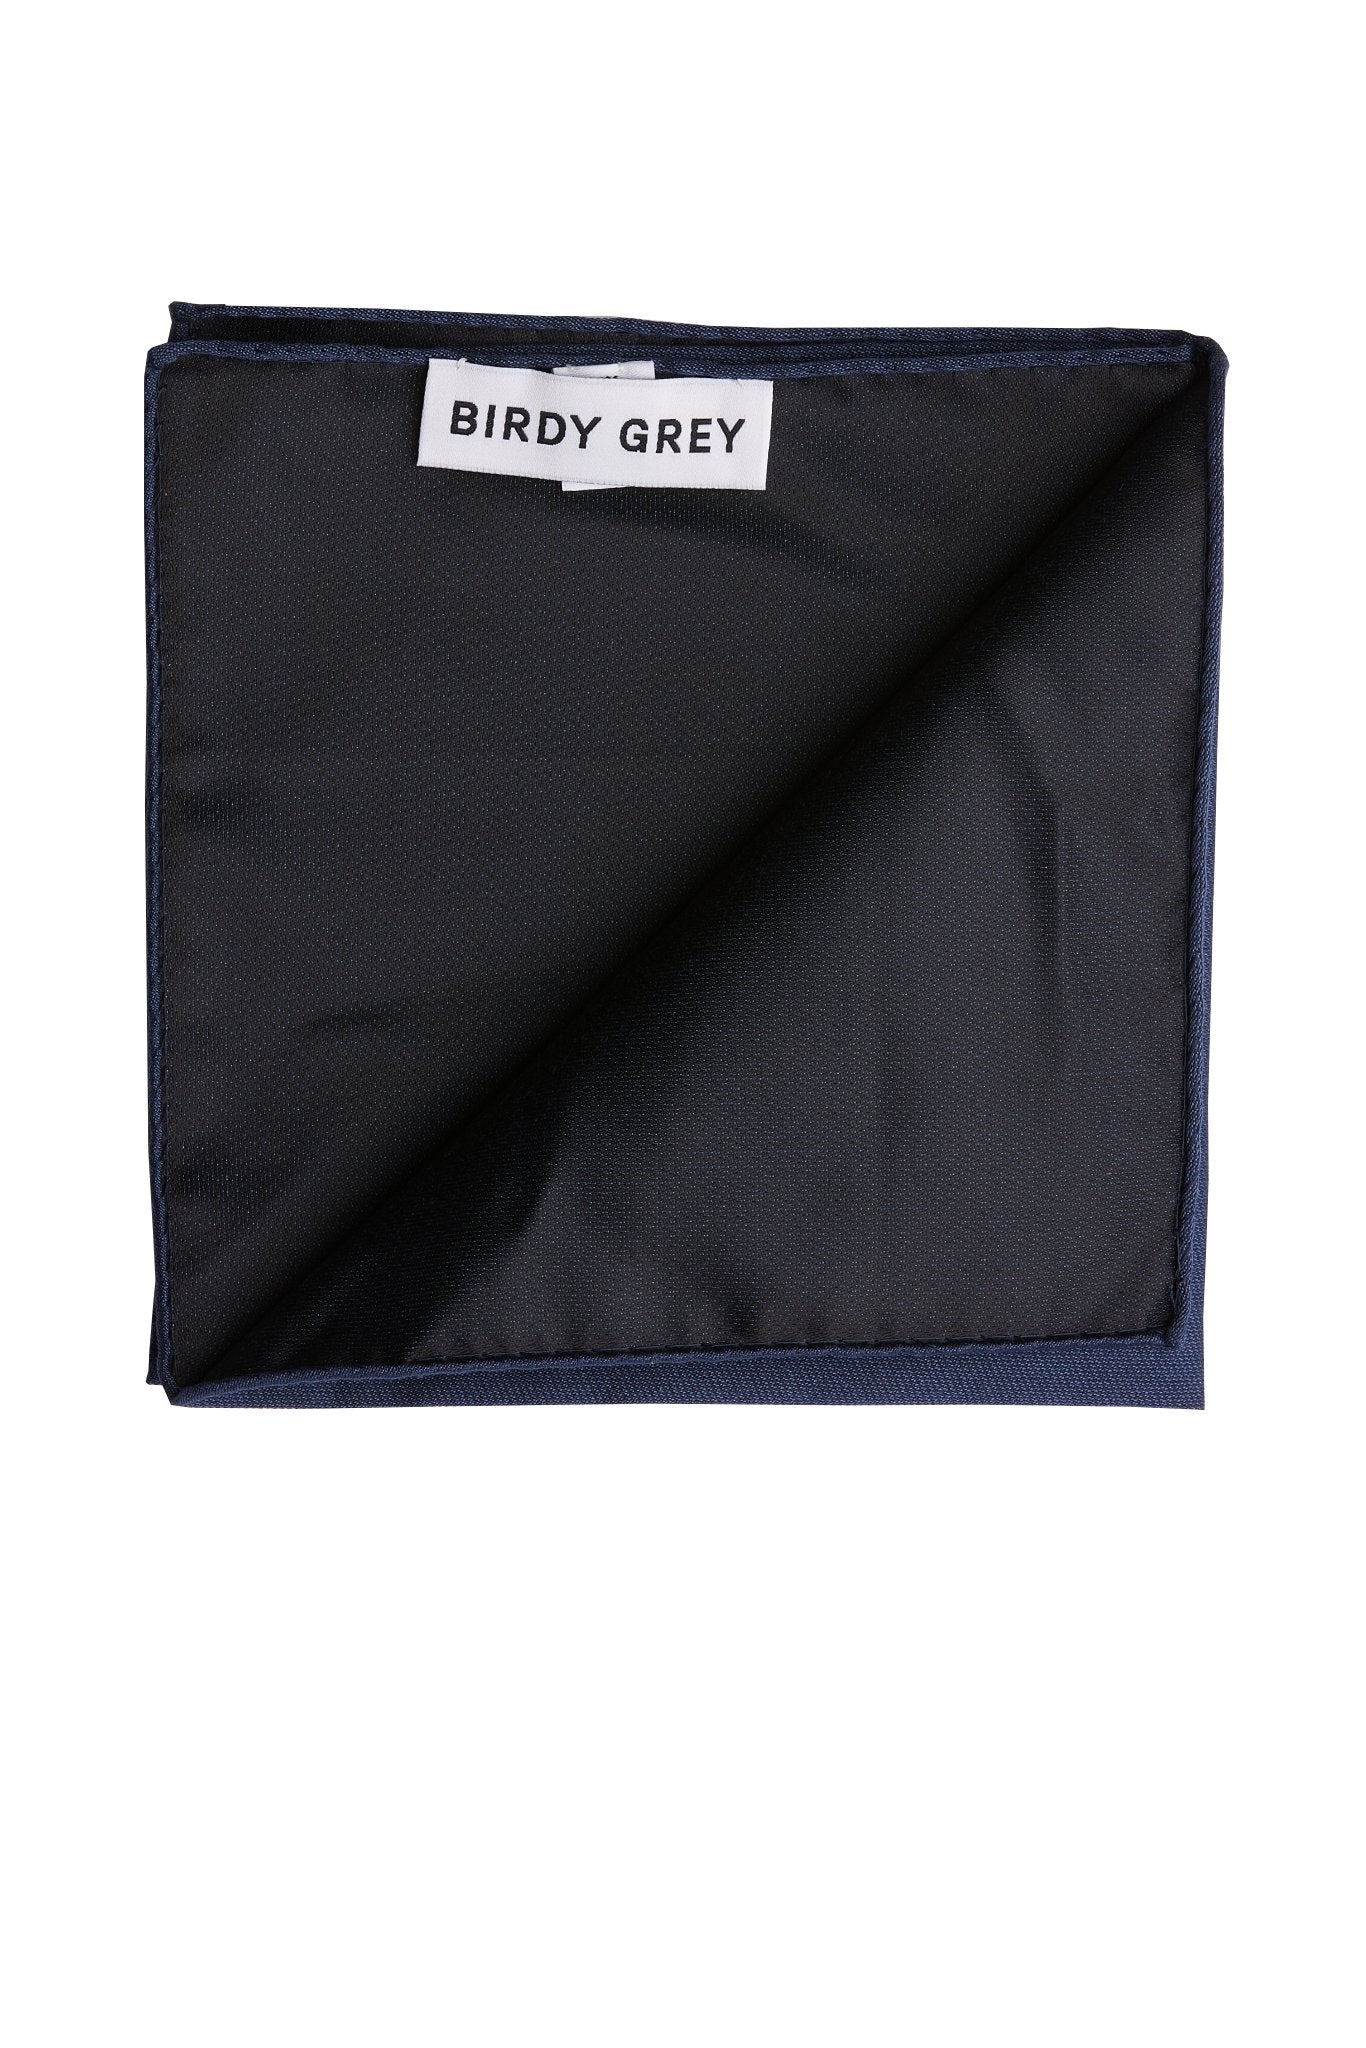 Didi Pocket Square in navy blue by Birdy Grey, interior view